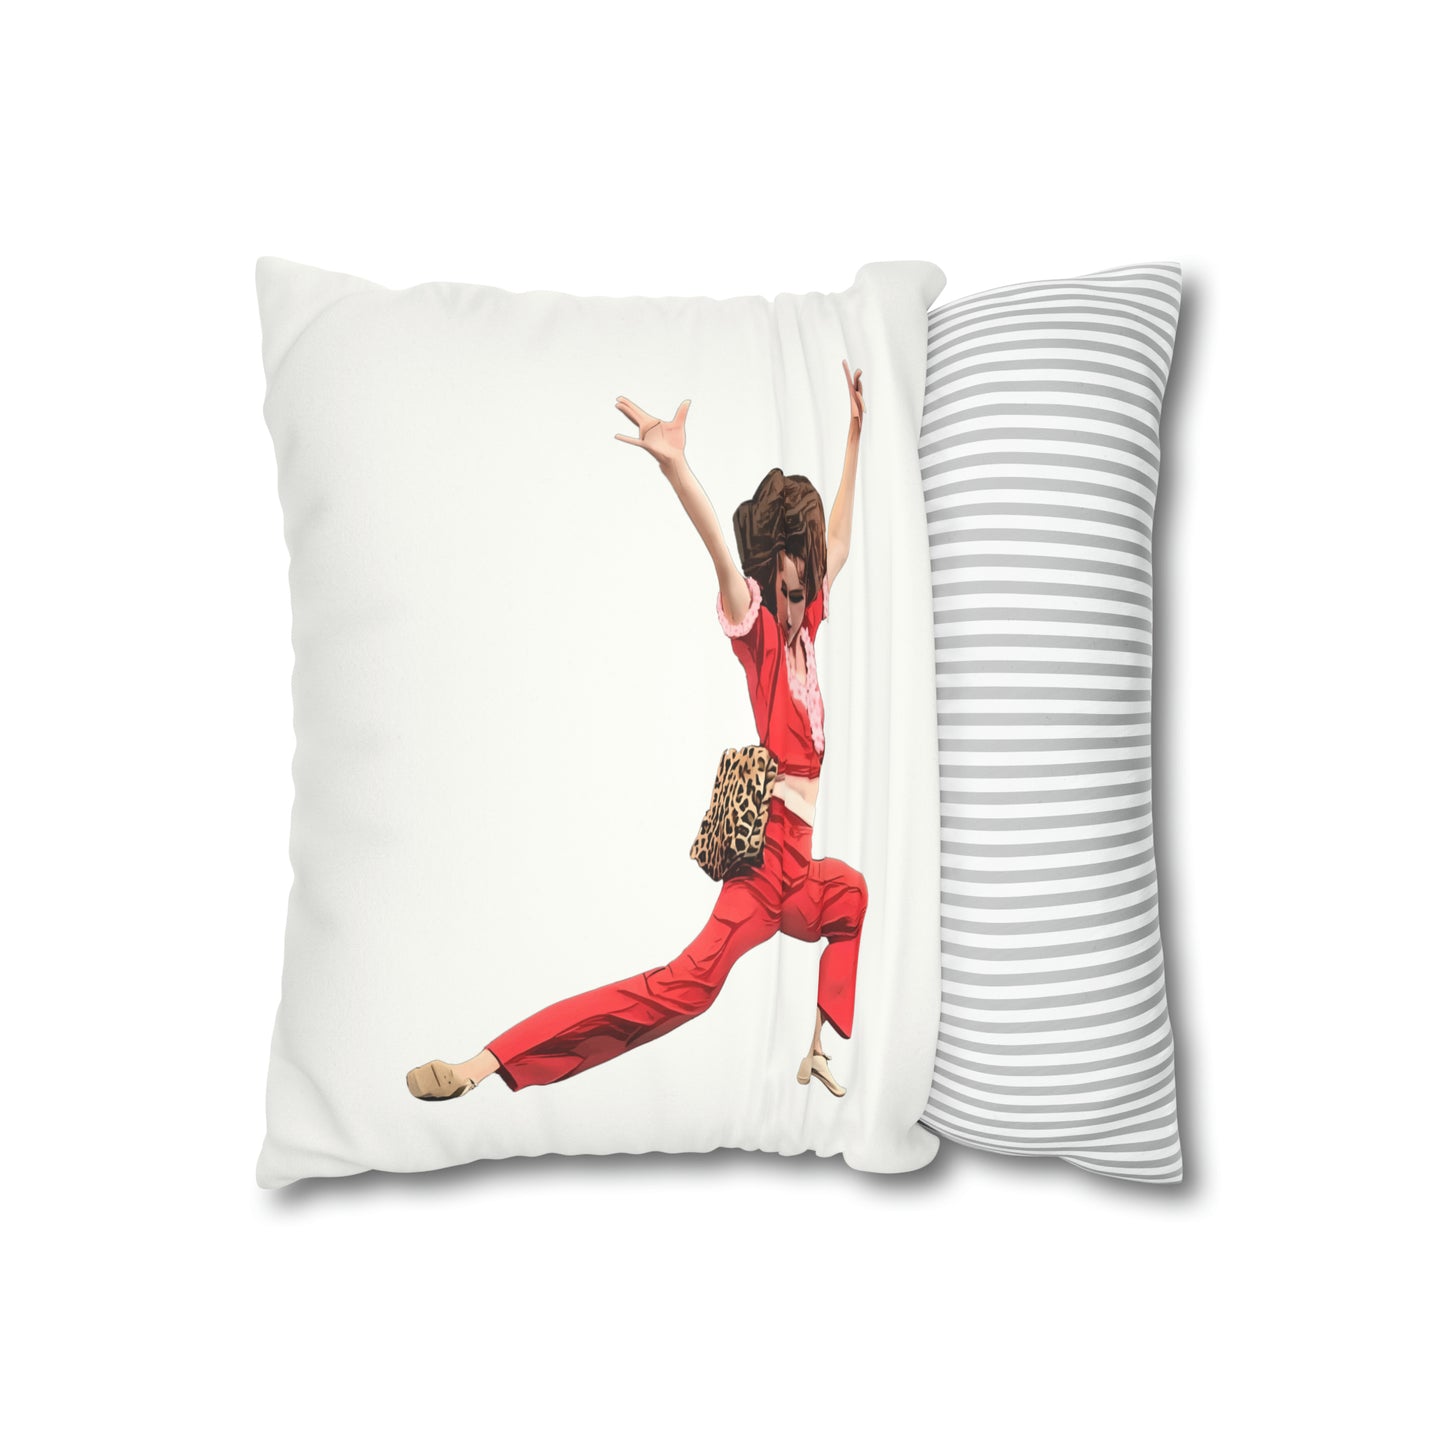 I'm 50, Sally O'Malley Throw Pillow, Molly Shannon, I like to Kick and Stretch